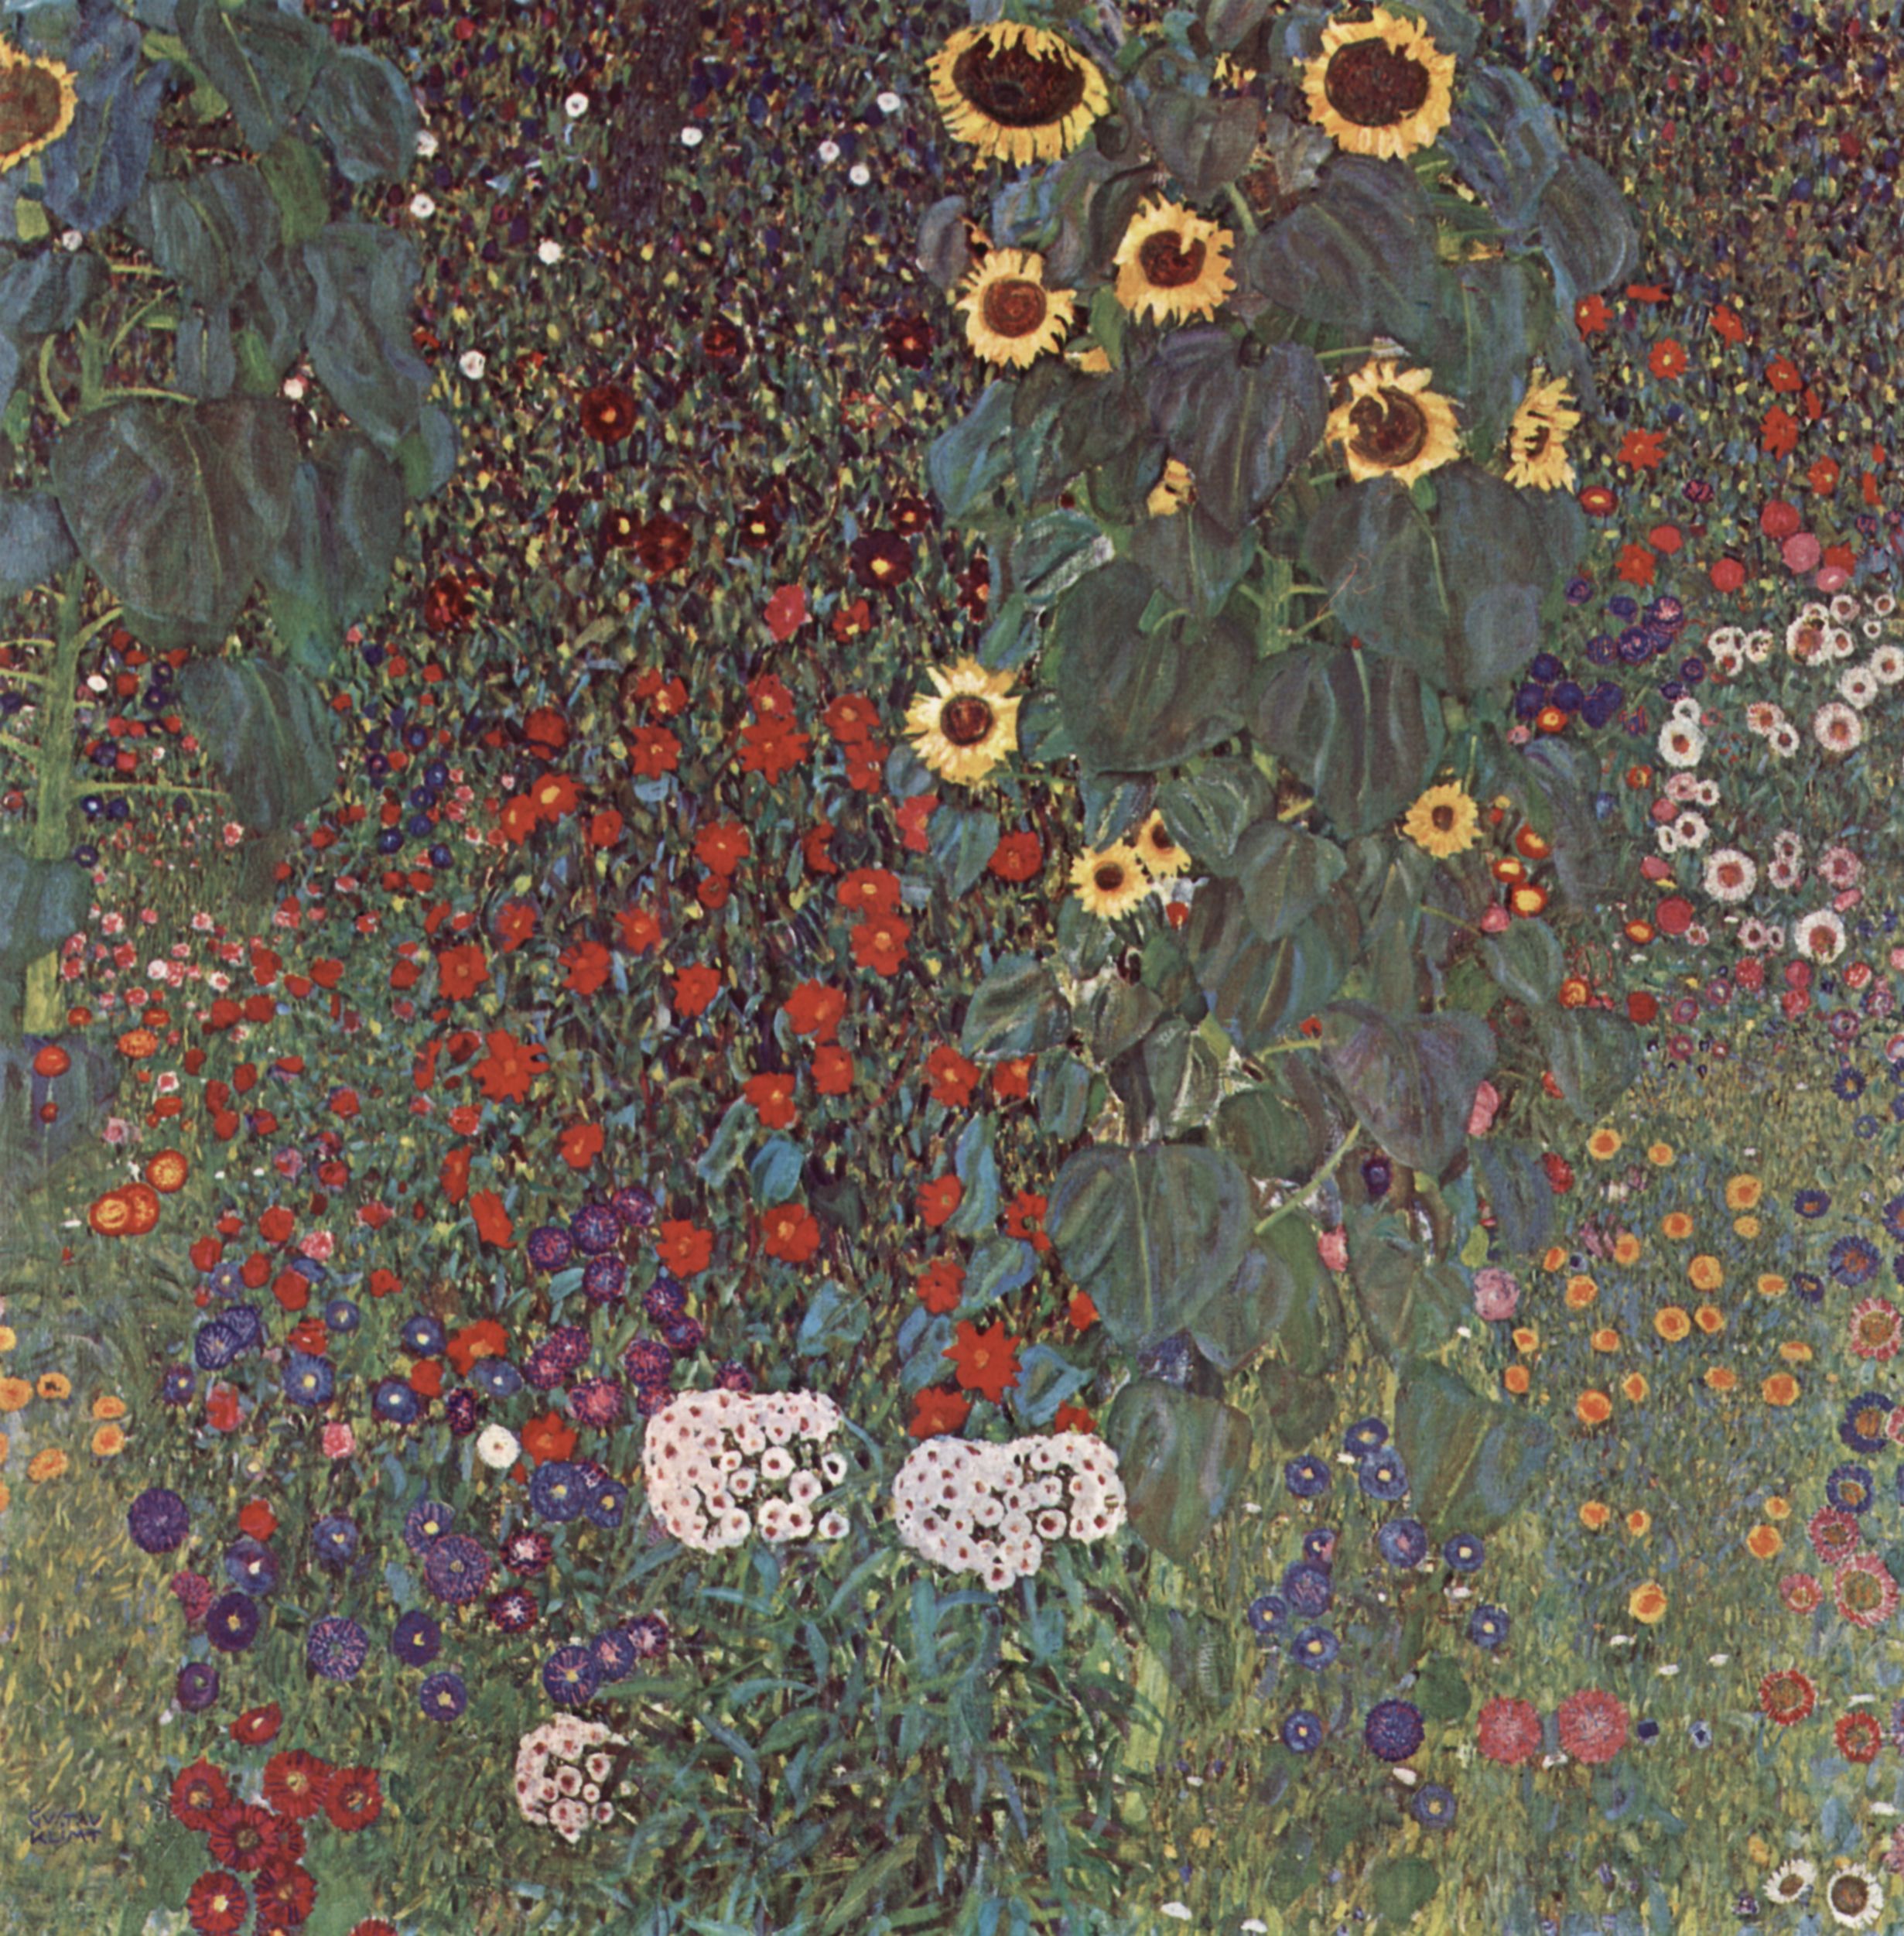 Country Garden with Sunflowers (1906).